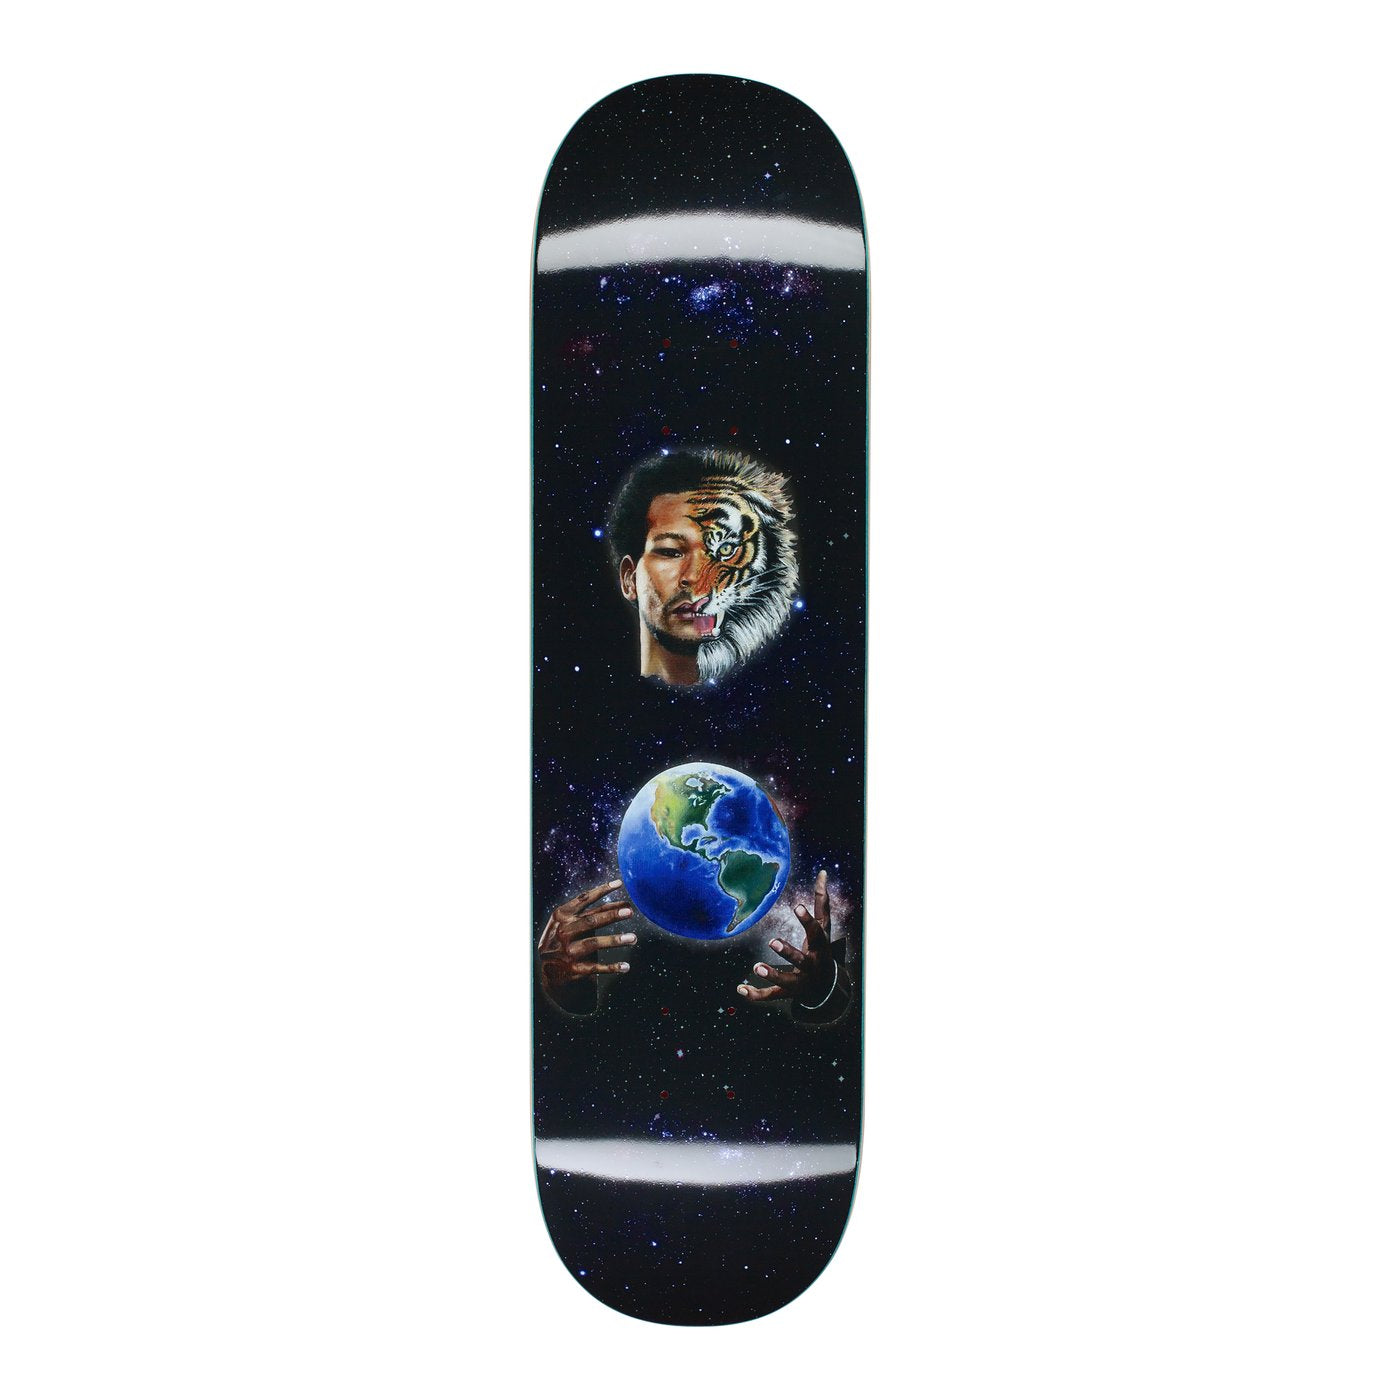 Tiger Na-Kel Smith Pro Deck (size options listed)